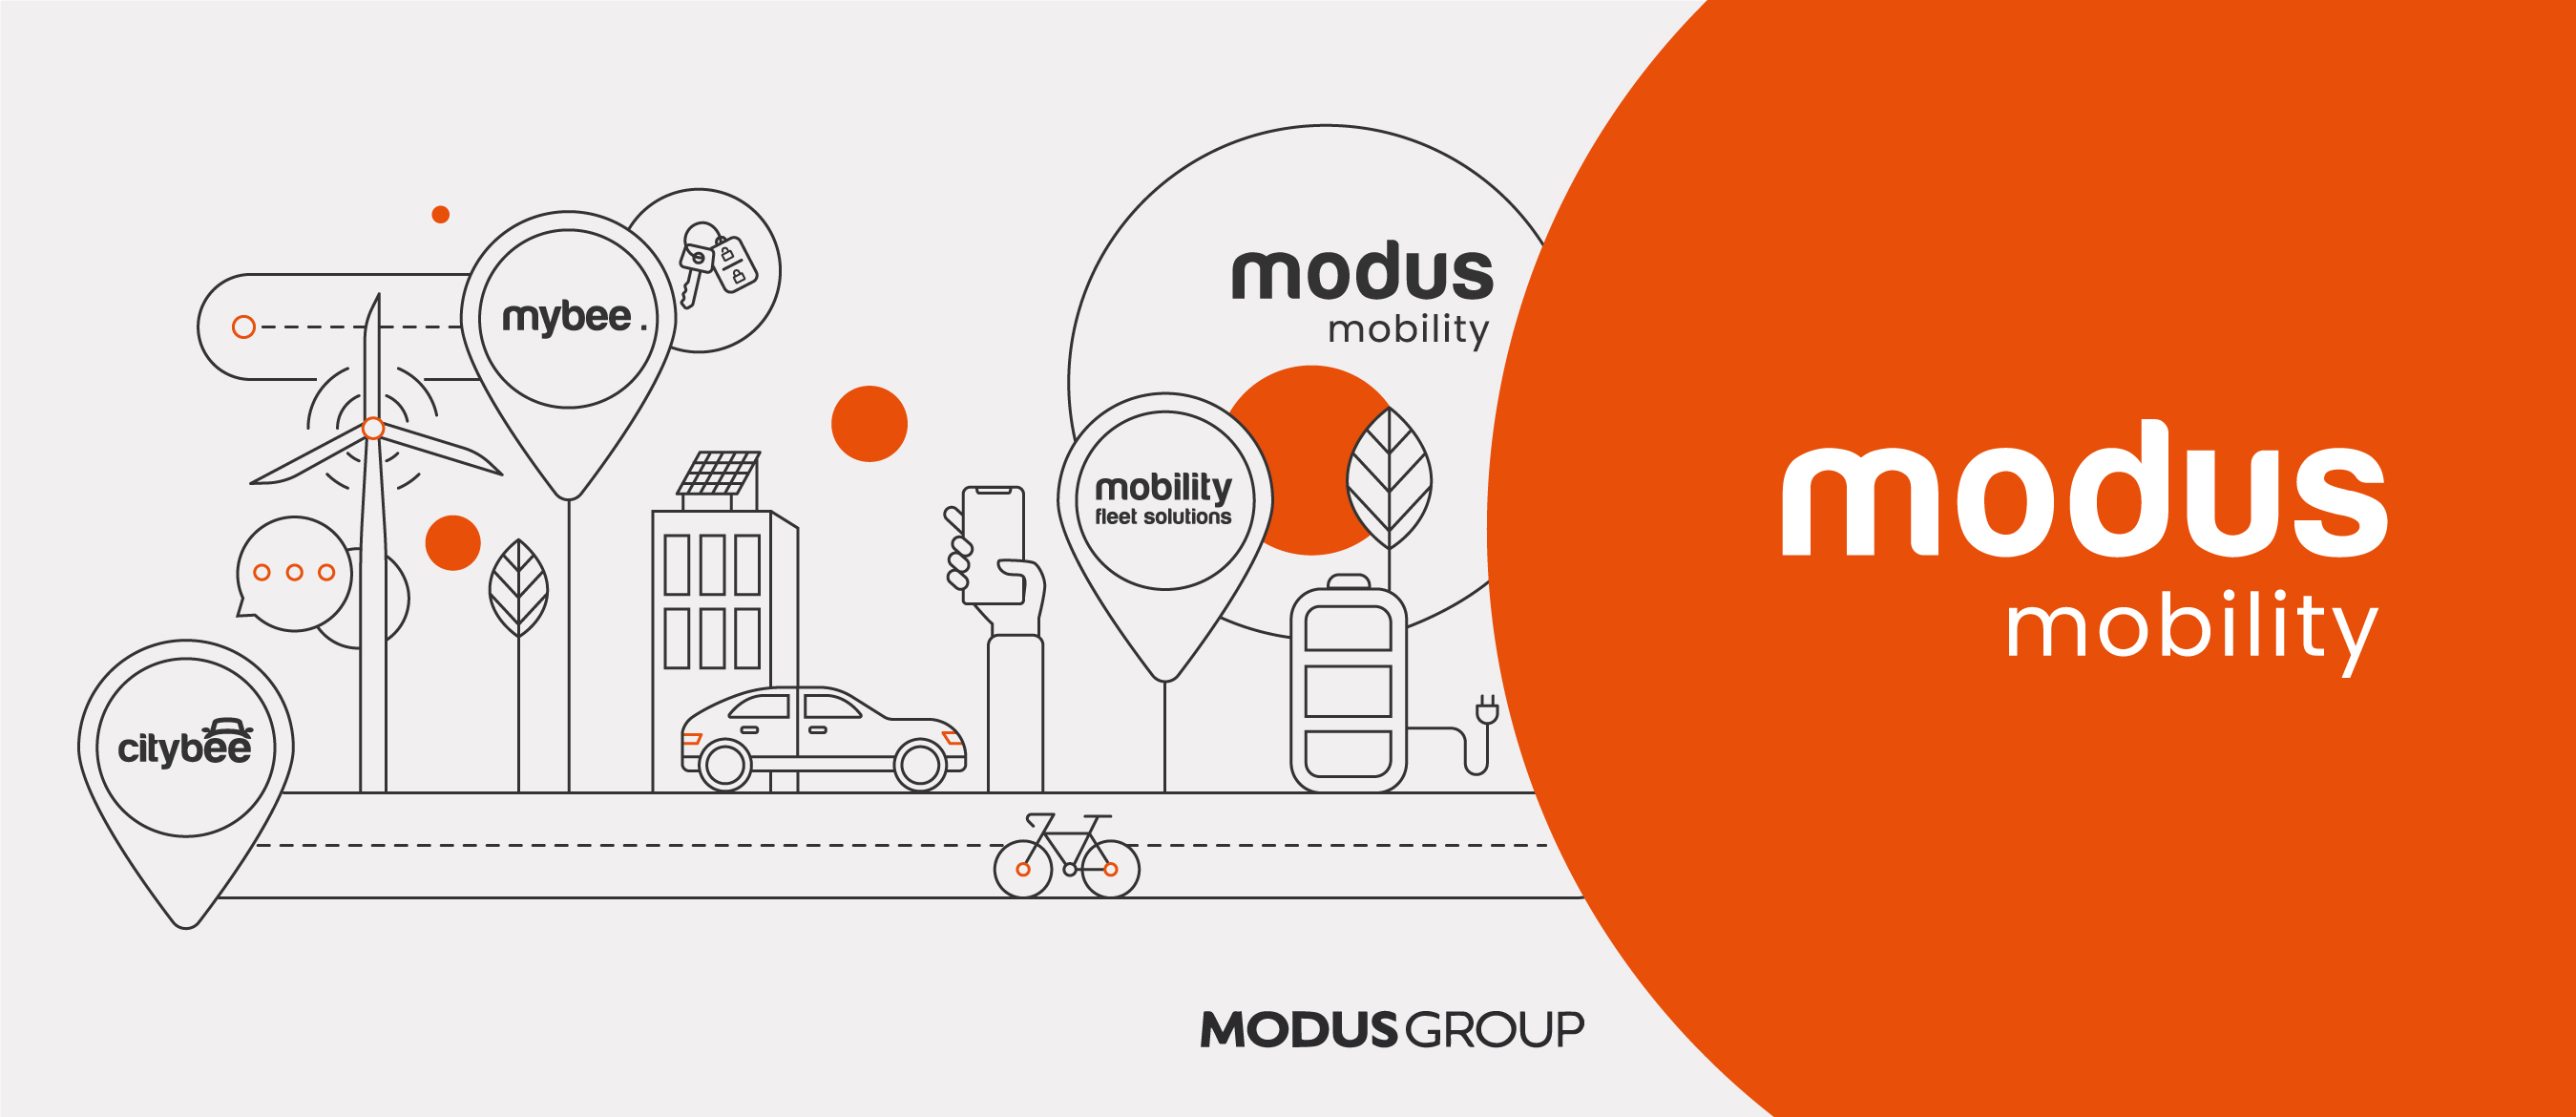 Modus Mobility Finance Project Manager